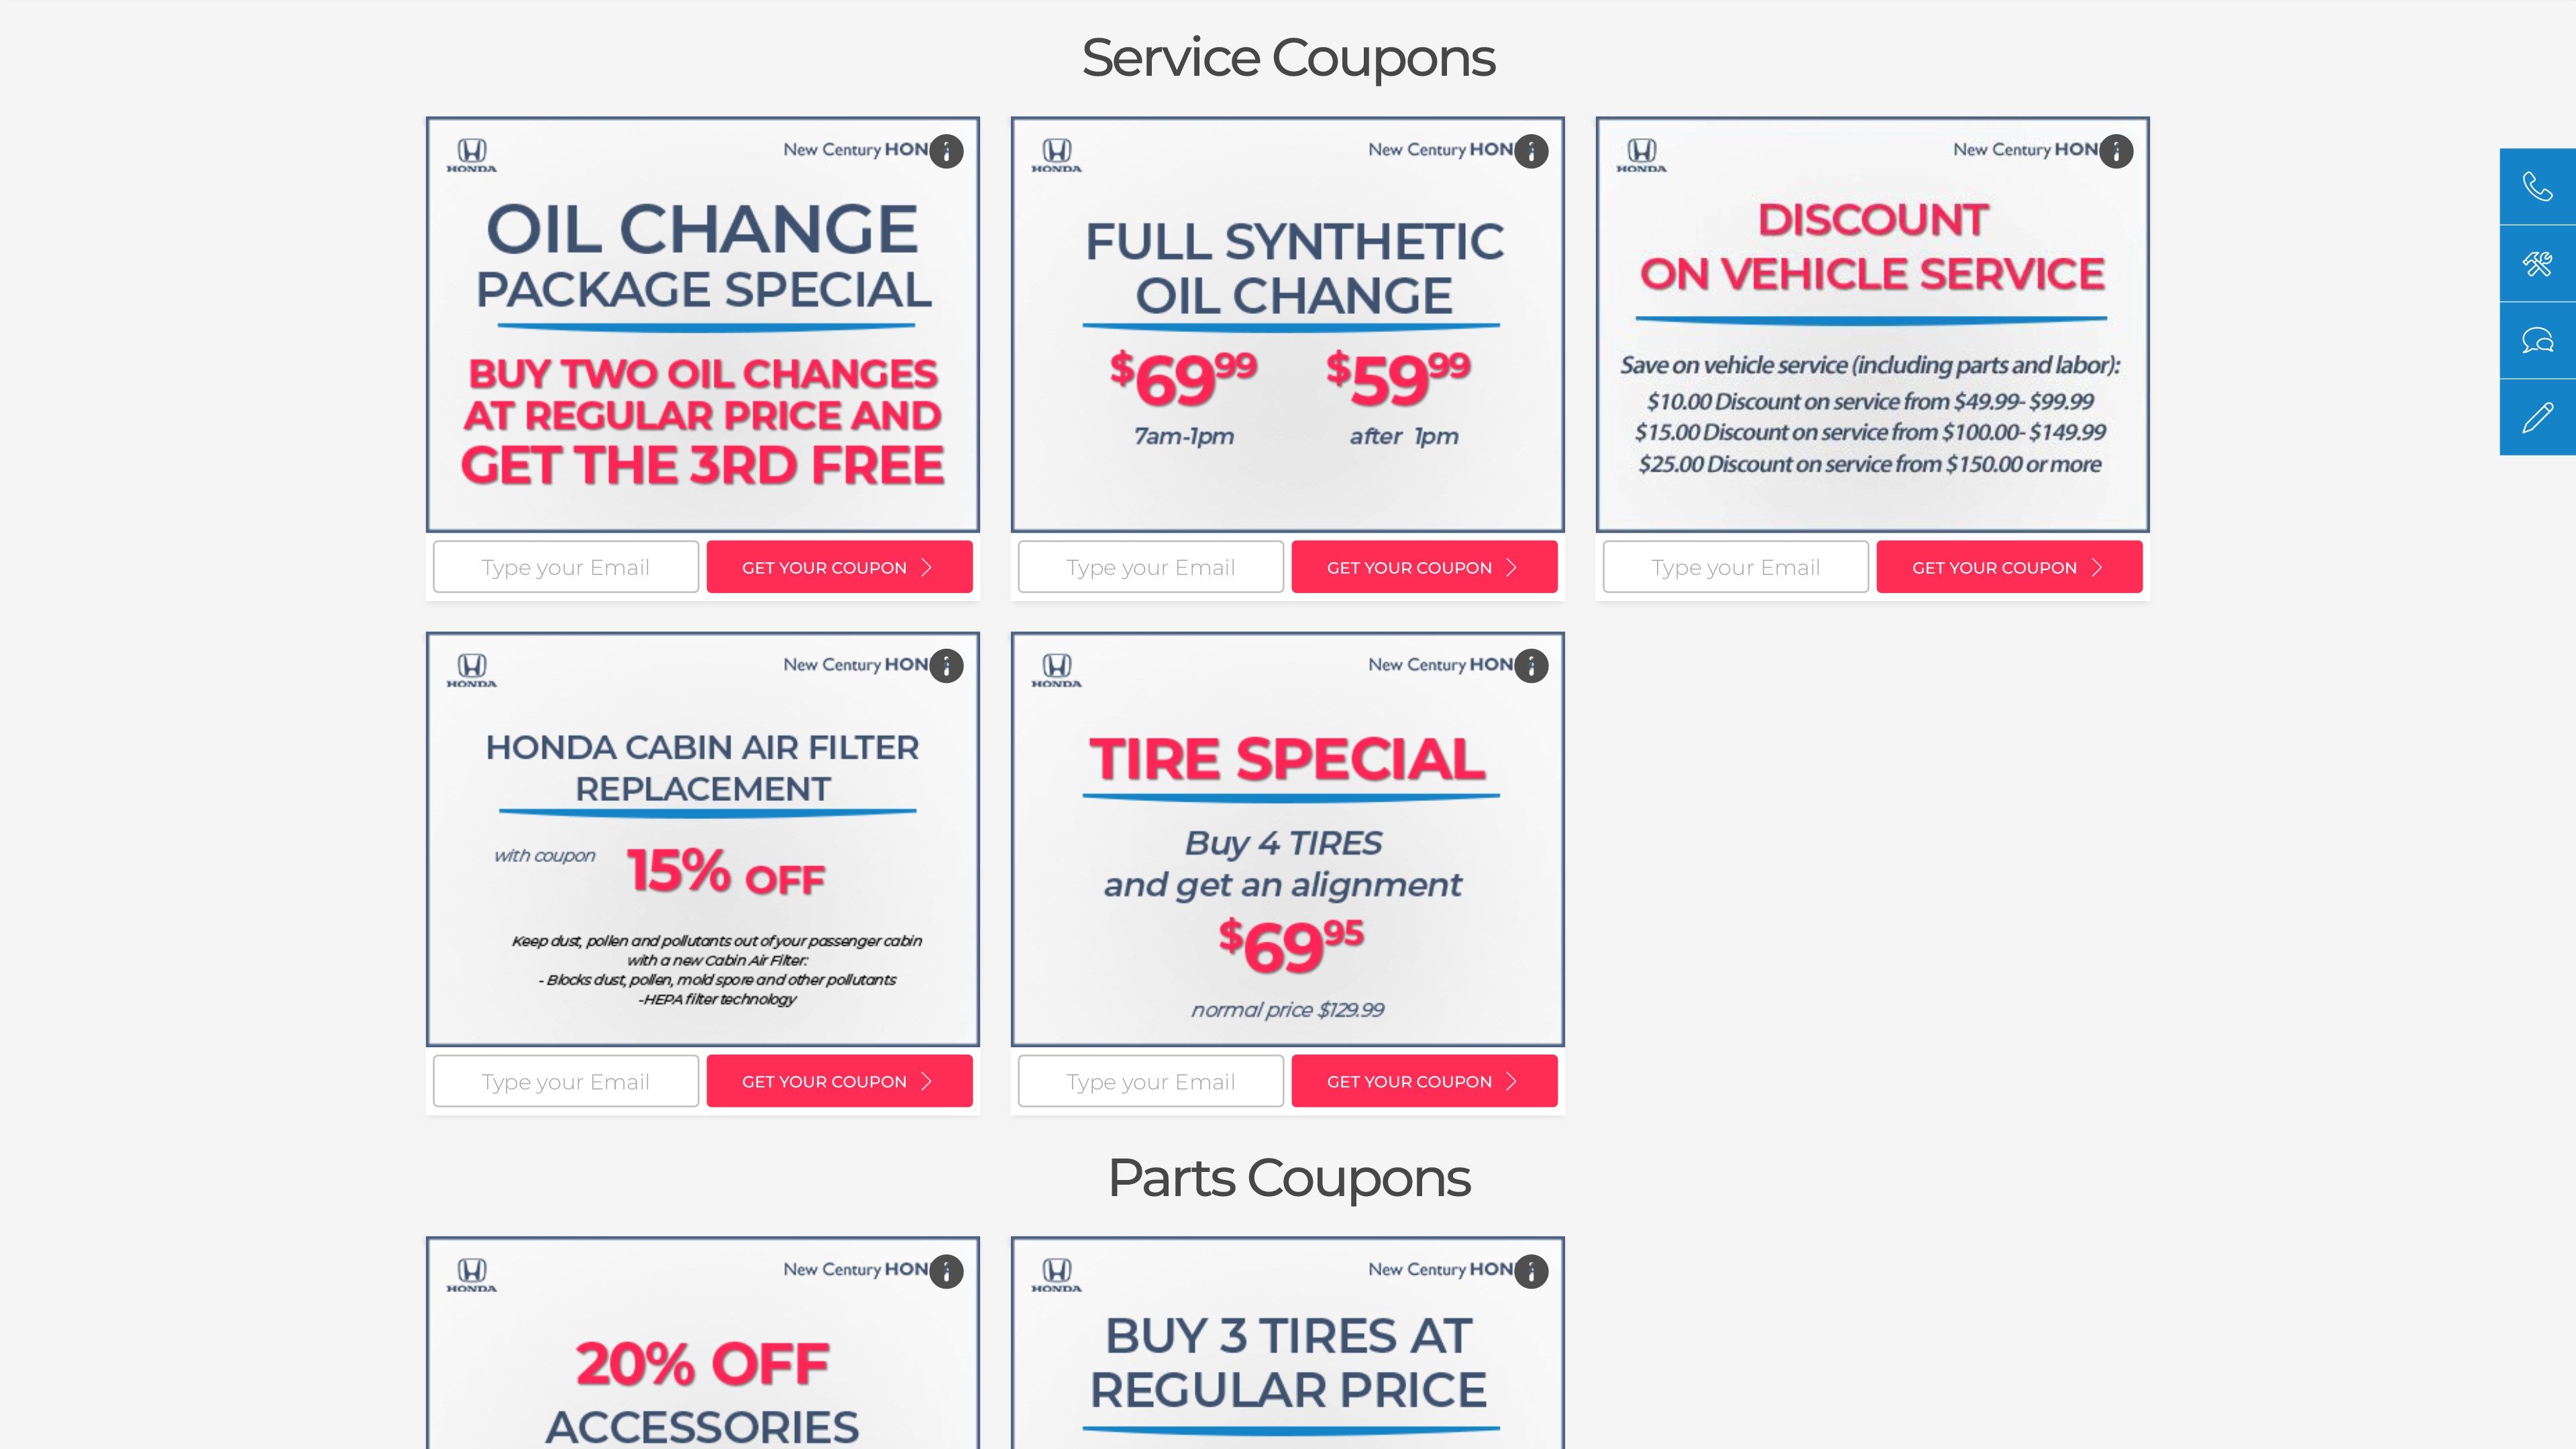 Service Coupons